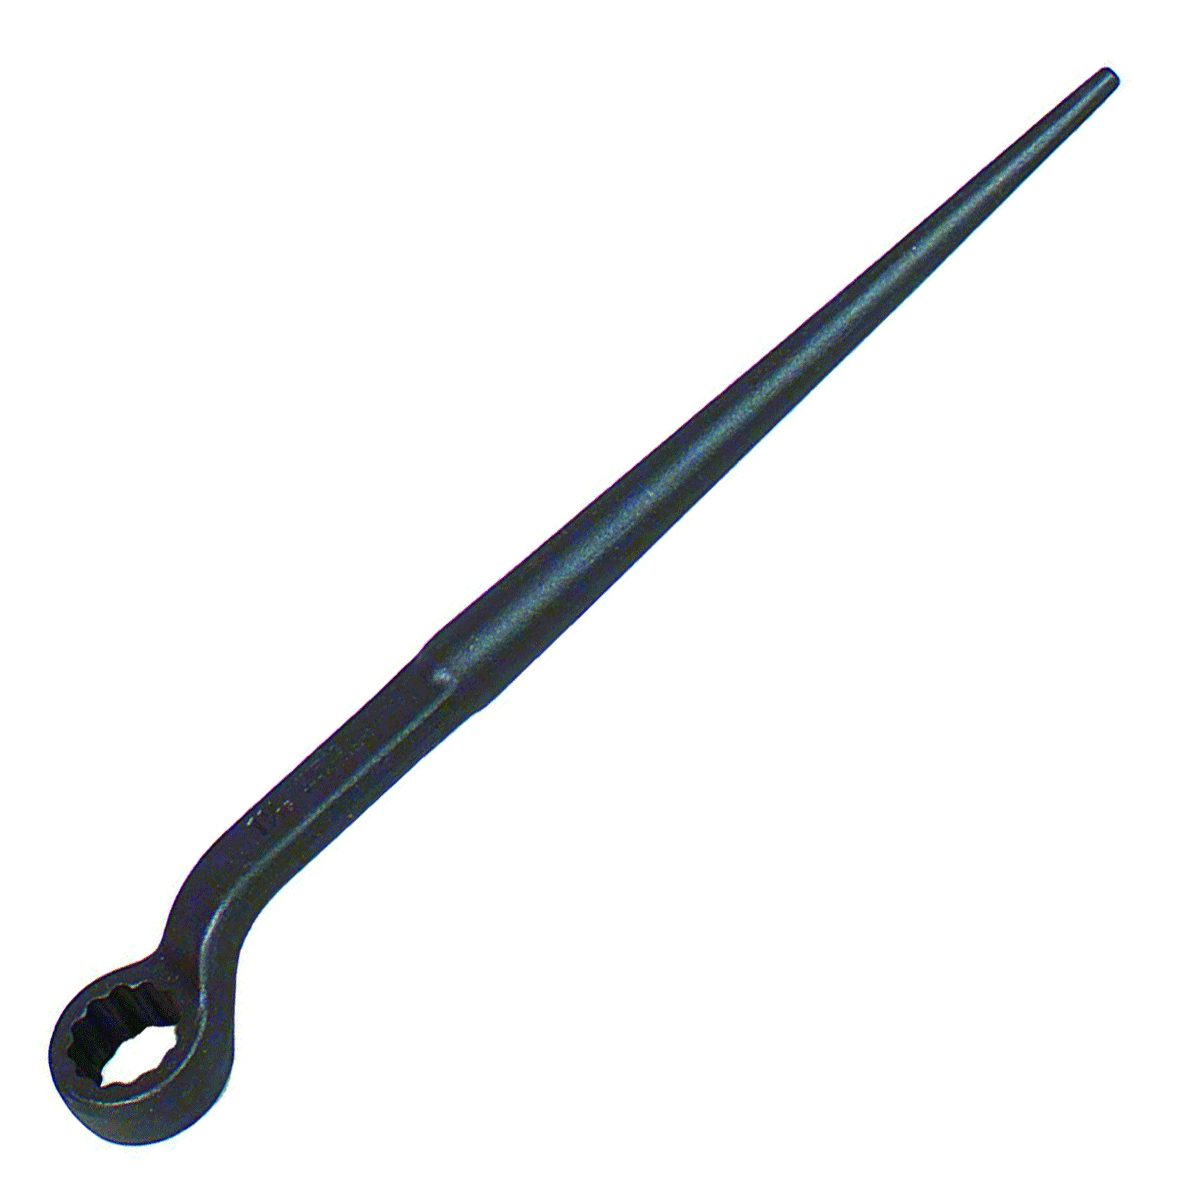 Wright 1-5/8" Spud Handle Box Wrench 12 Pt. #1782 (1782WR)